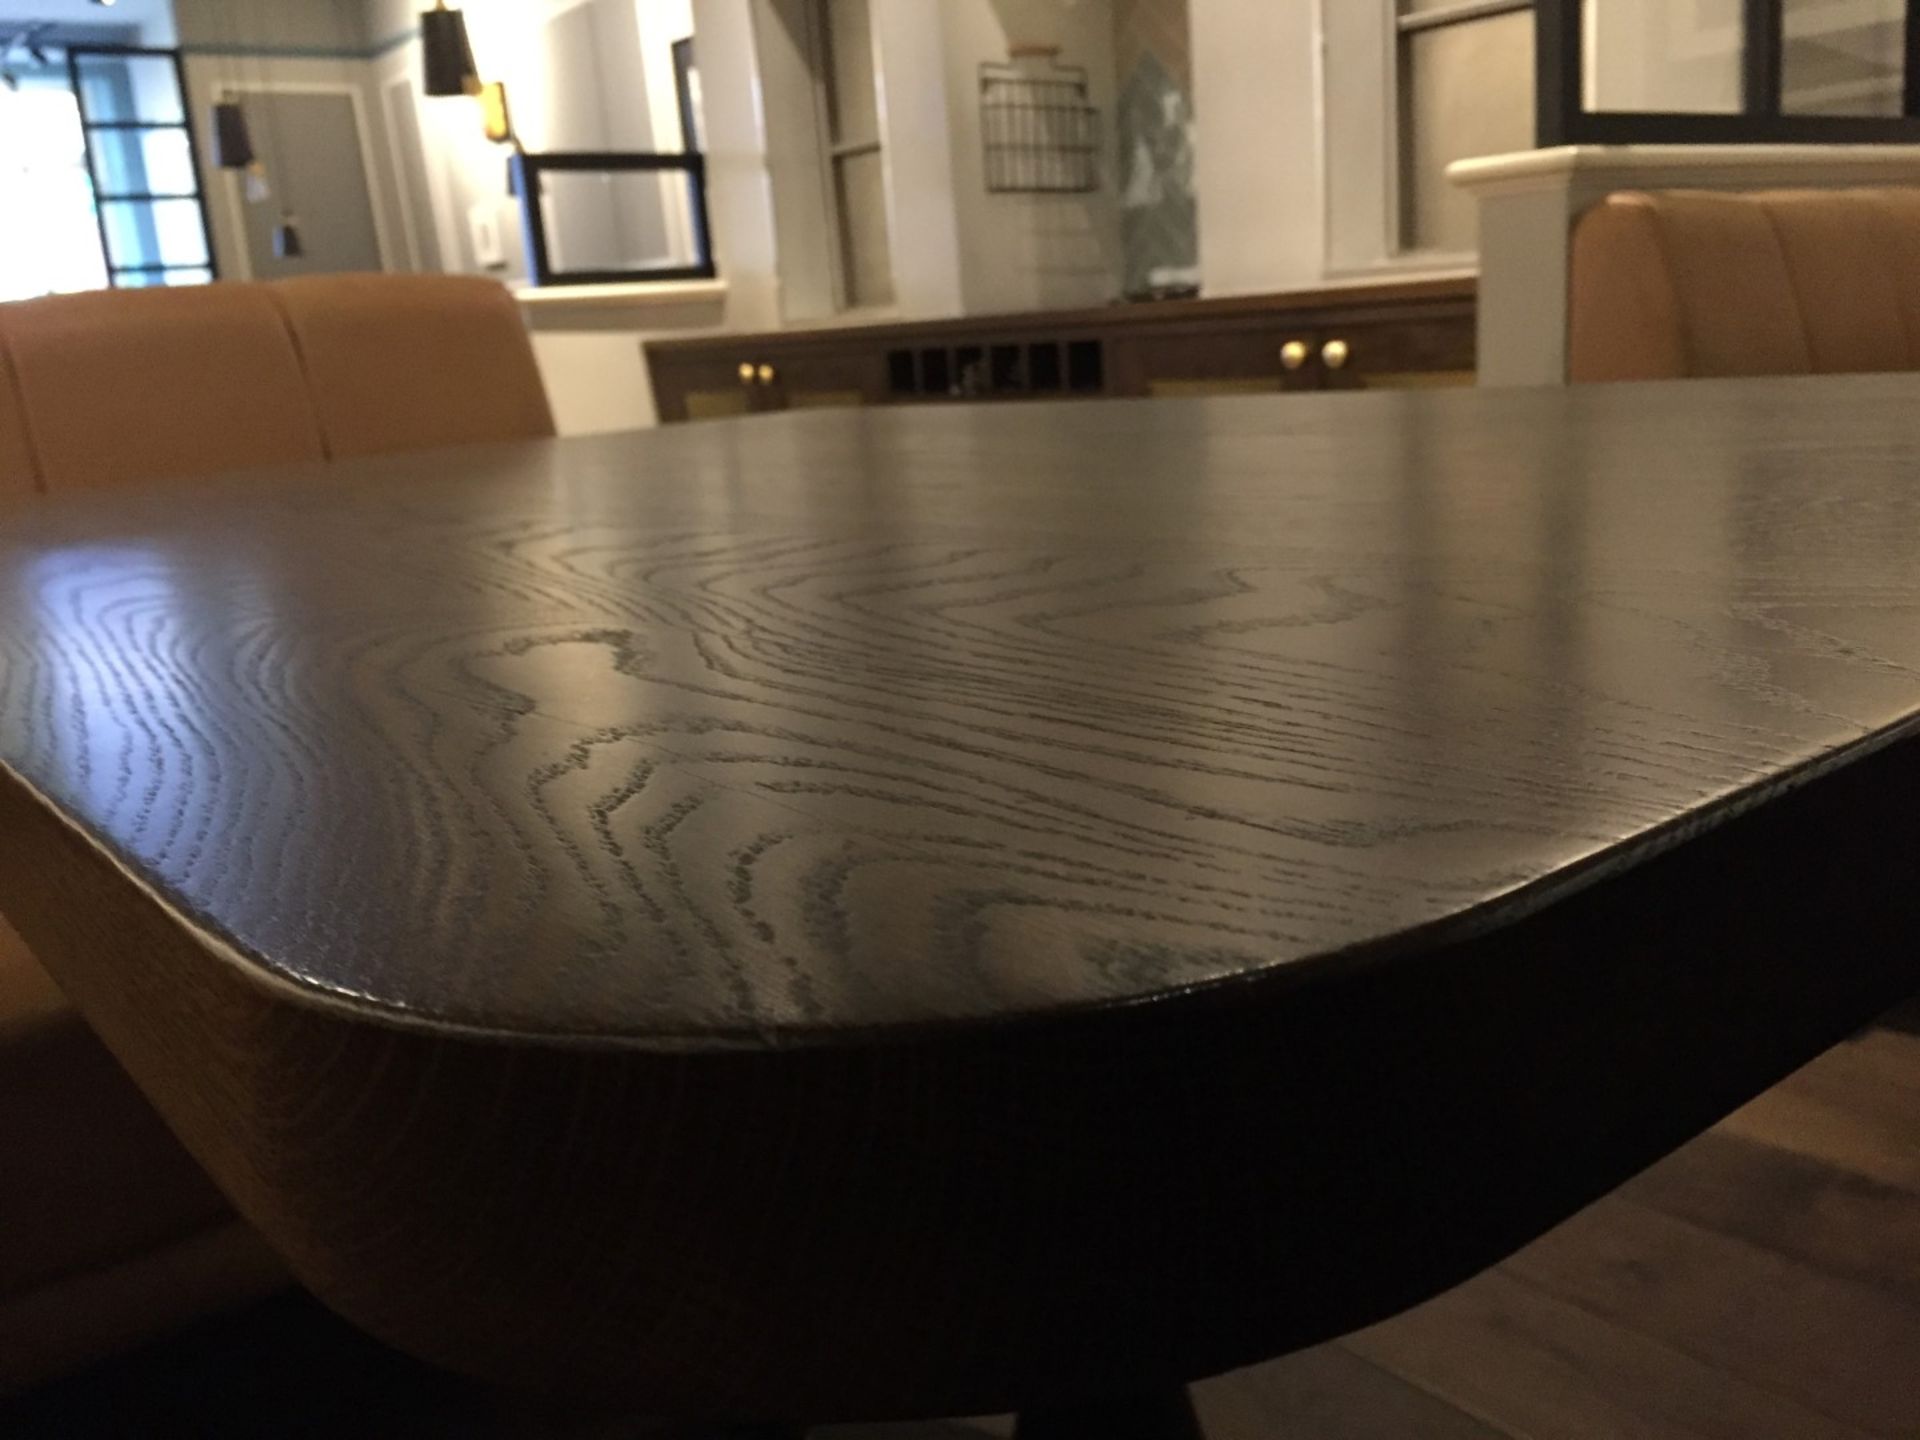 1 x Luxurious High End Shaped Restaurant Table - Features A Stunning Solid Wood Top With A - Image 4 of 10